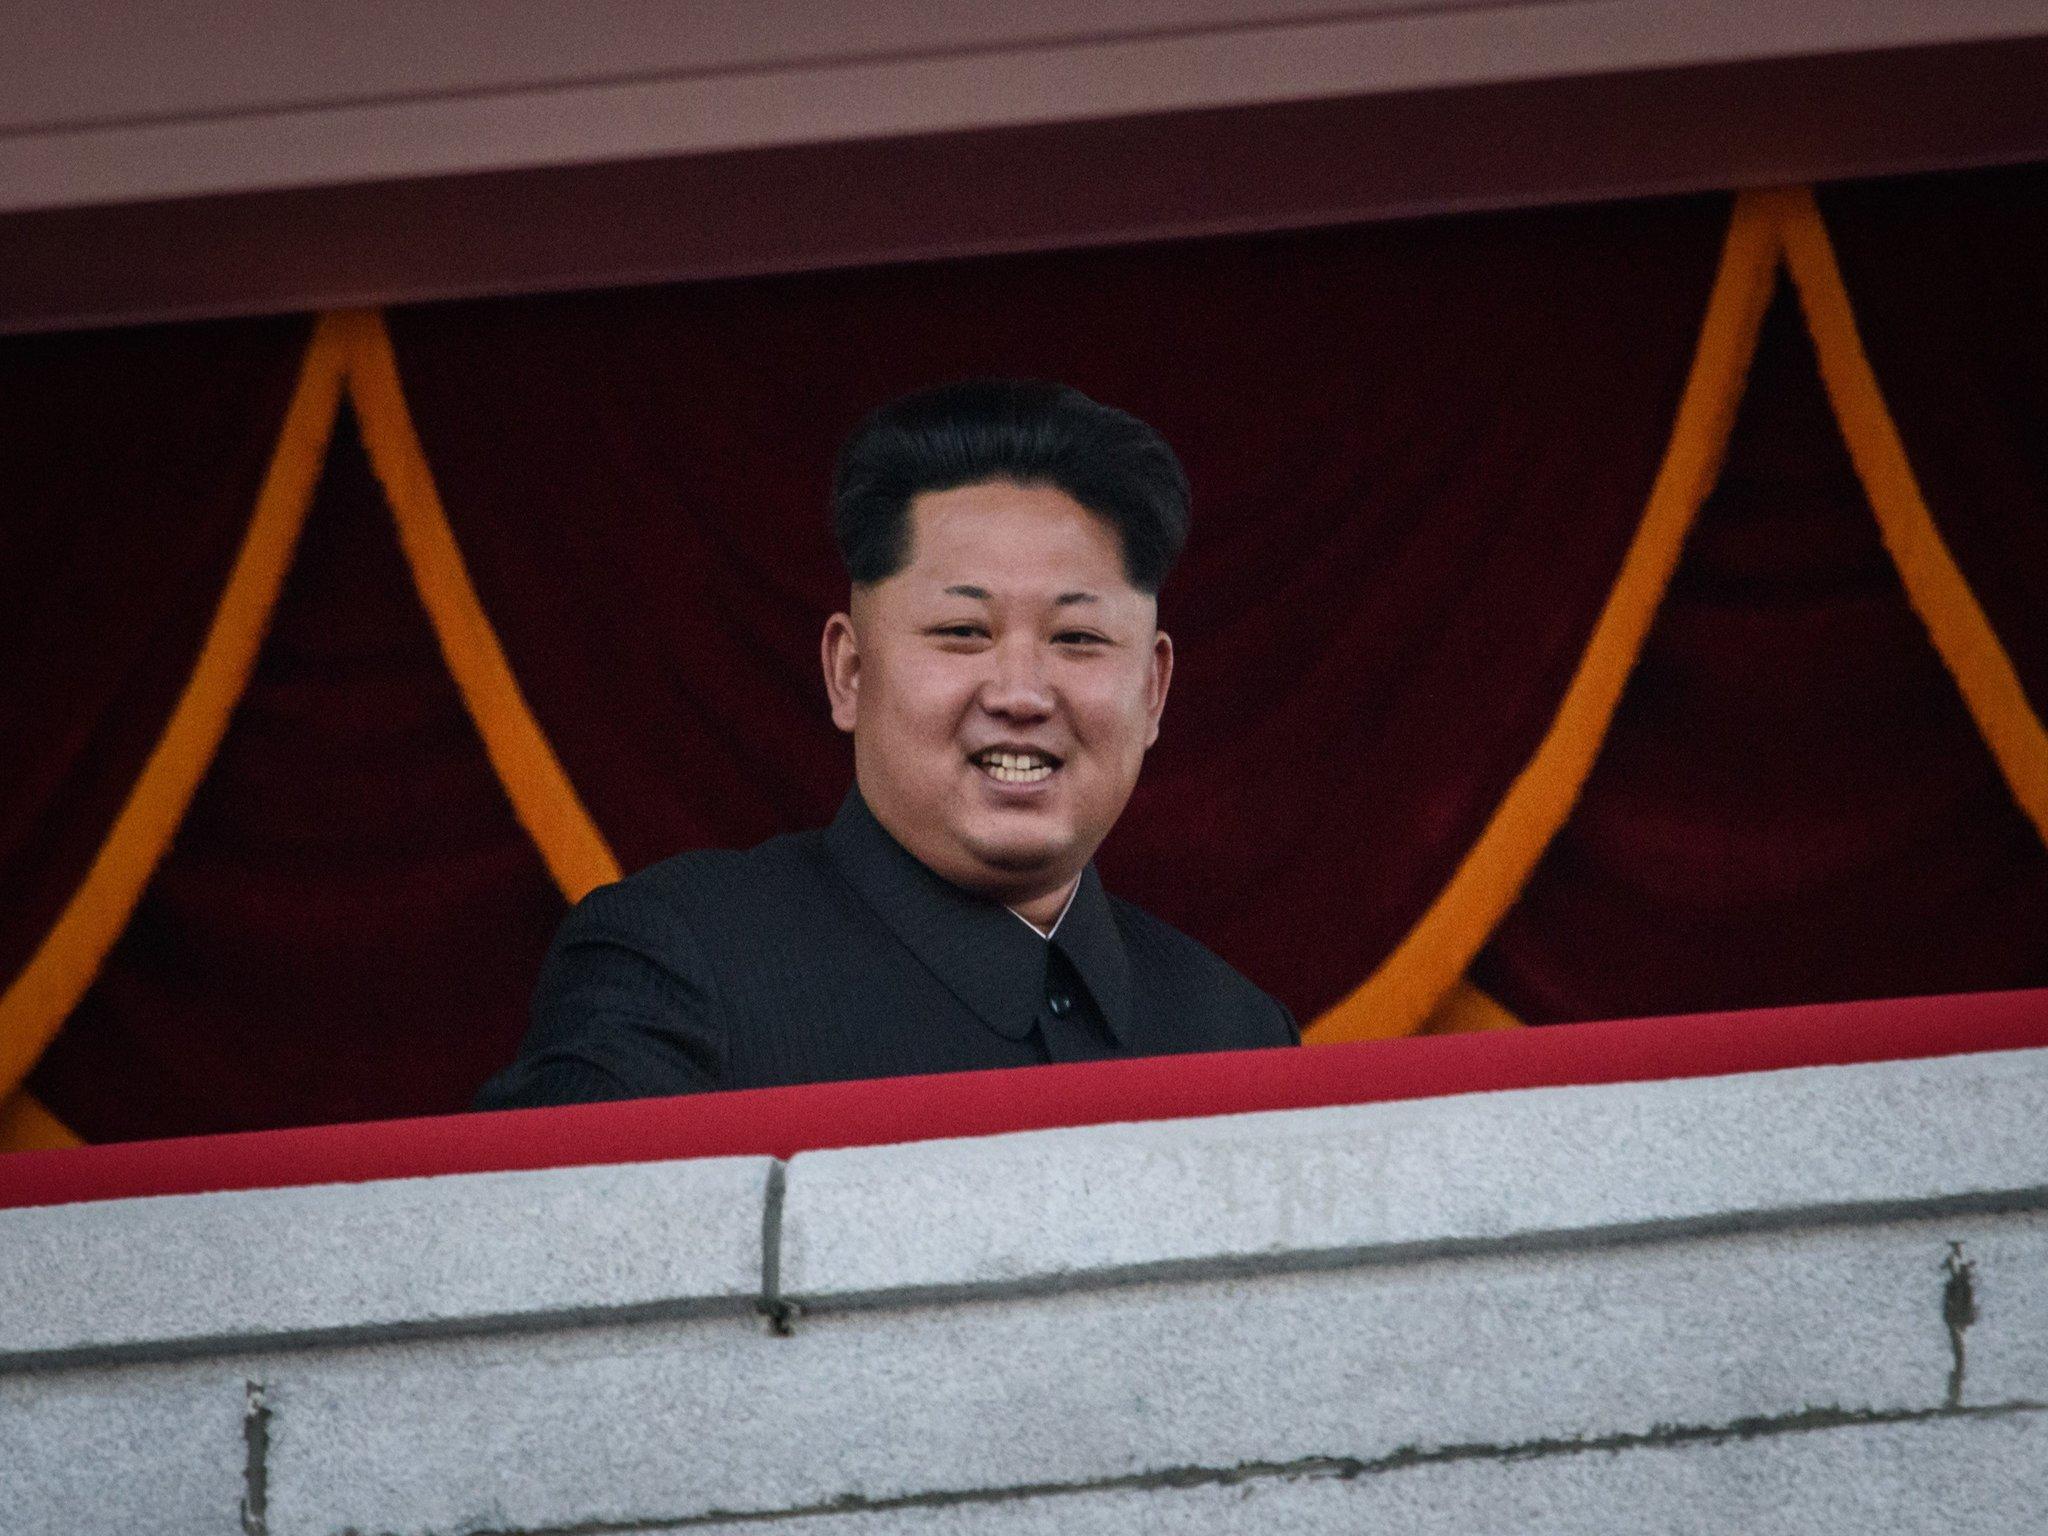 North Korea's leader Kim Jong-Un has reportedly gained up to 40kg in weight since he took power